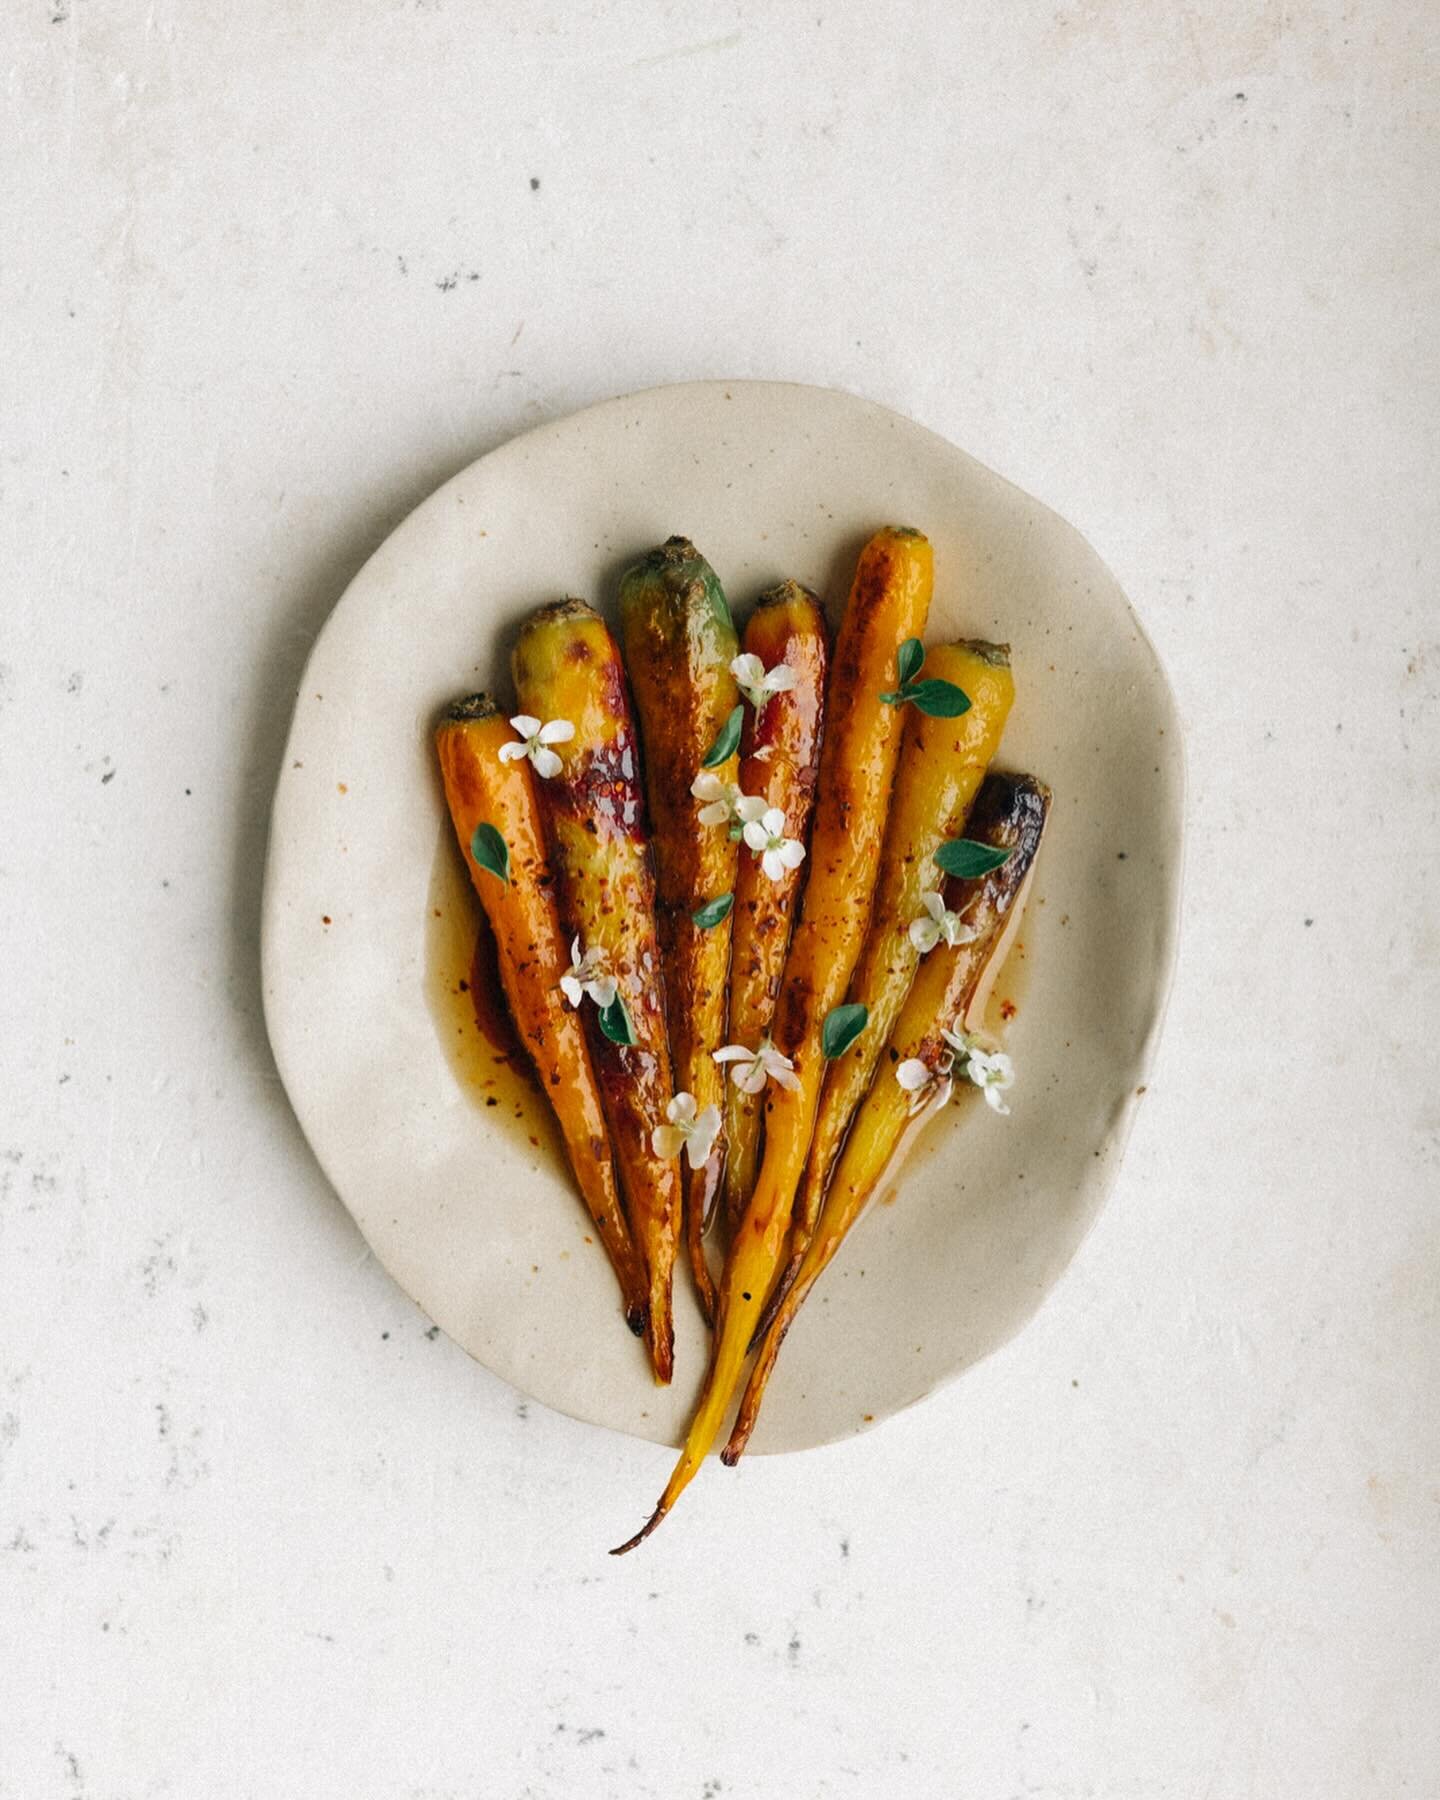 Two more recipes by @giorgiaeugeniagoggi :
- Carrots with brown butter, chili &amp; honey
- Brioche toast with whipped butter and bottarga